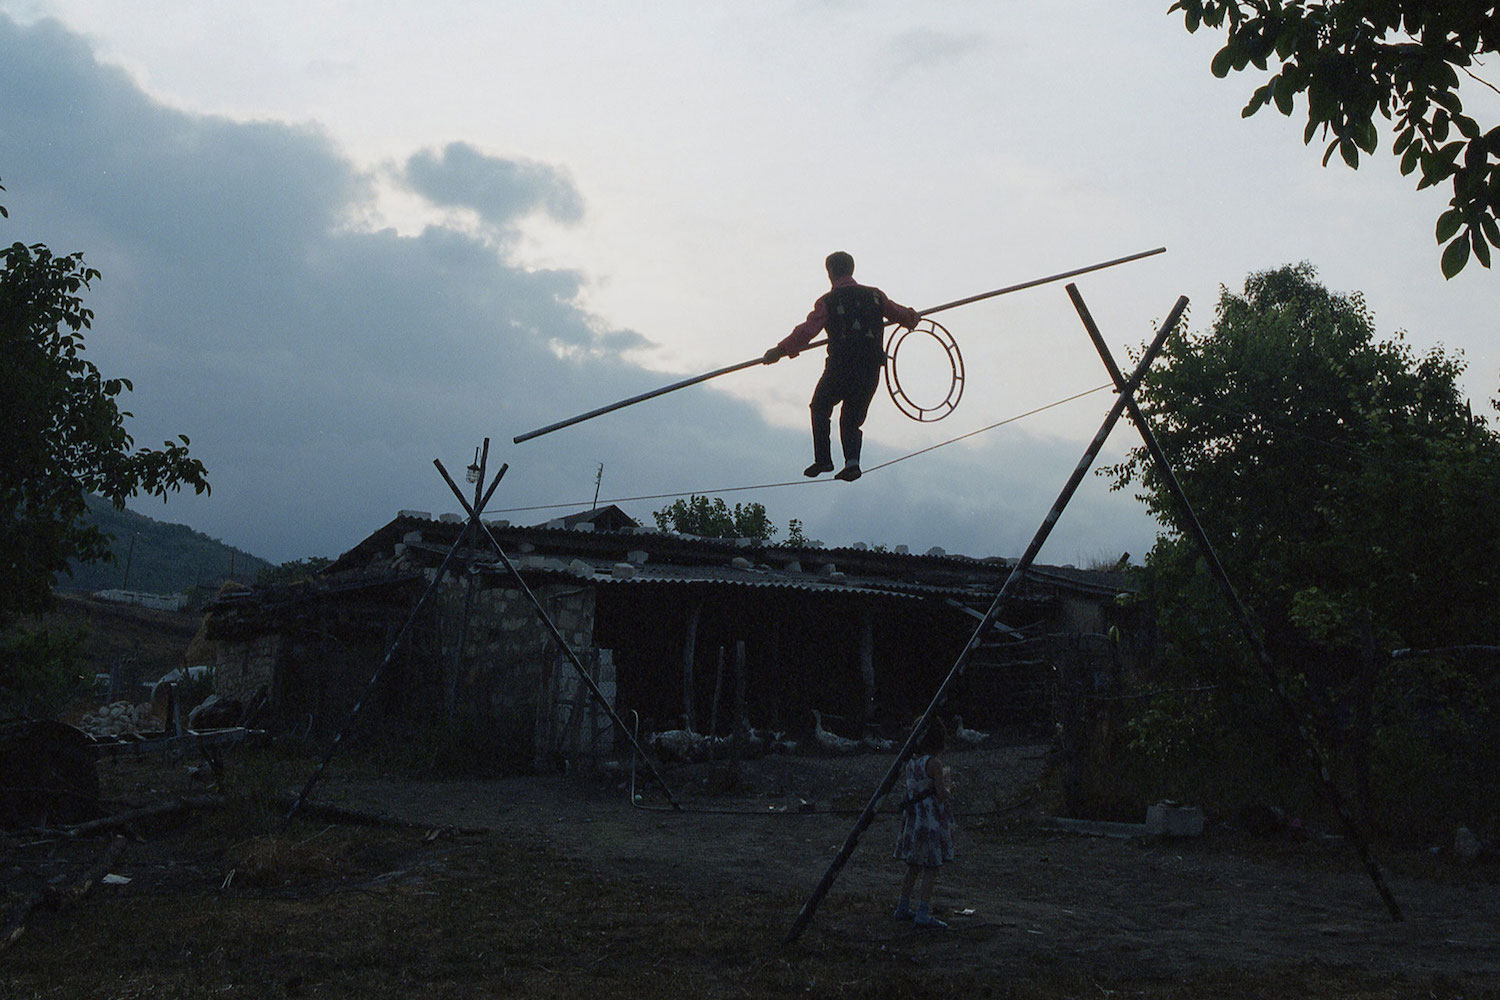 Saving the ancient tightrope tradition of Dagestan